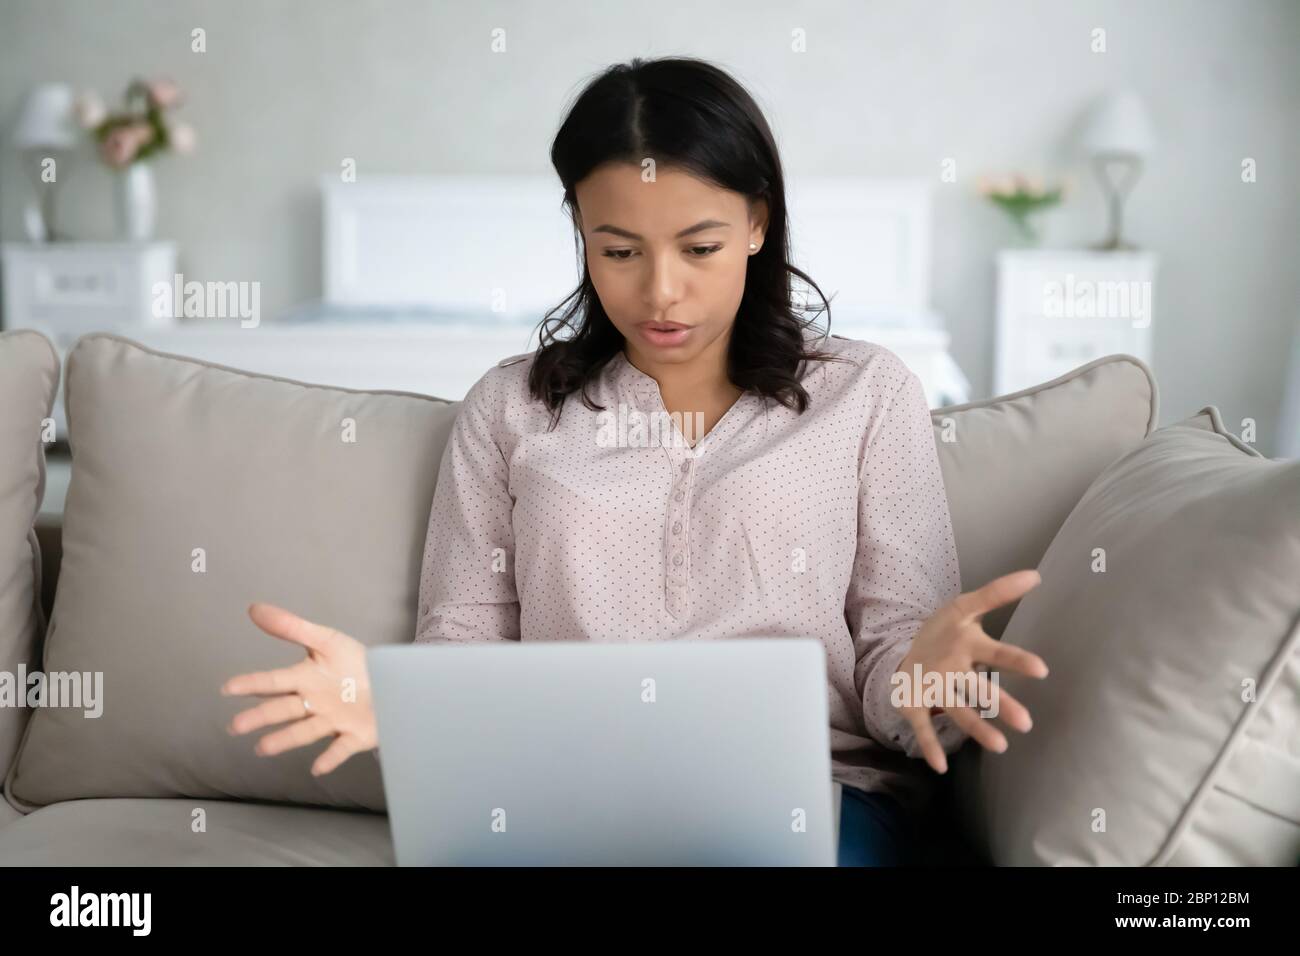 Woman having problems with computer looks at screen feels annoyed Stock Photo